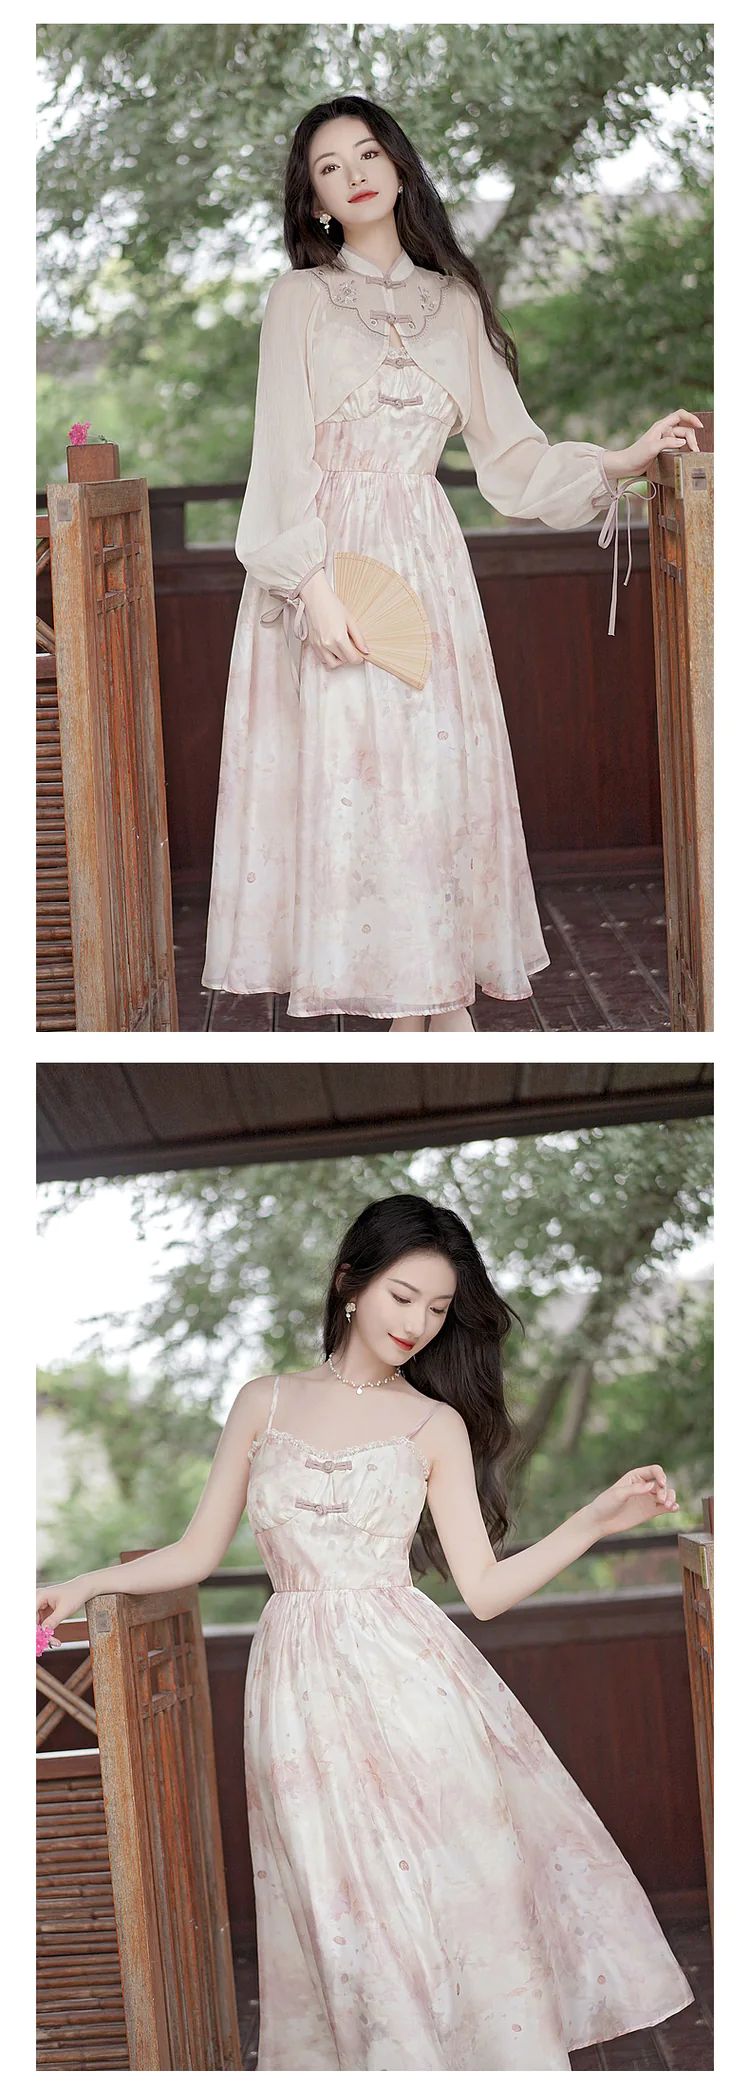 Romantic-Soft-Pink-Floral-Casual-Dress-with-Chiffon-Sun-Protection-Top16